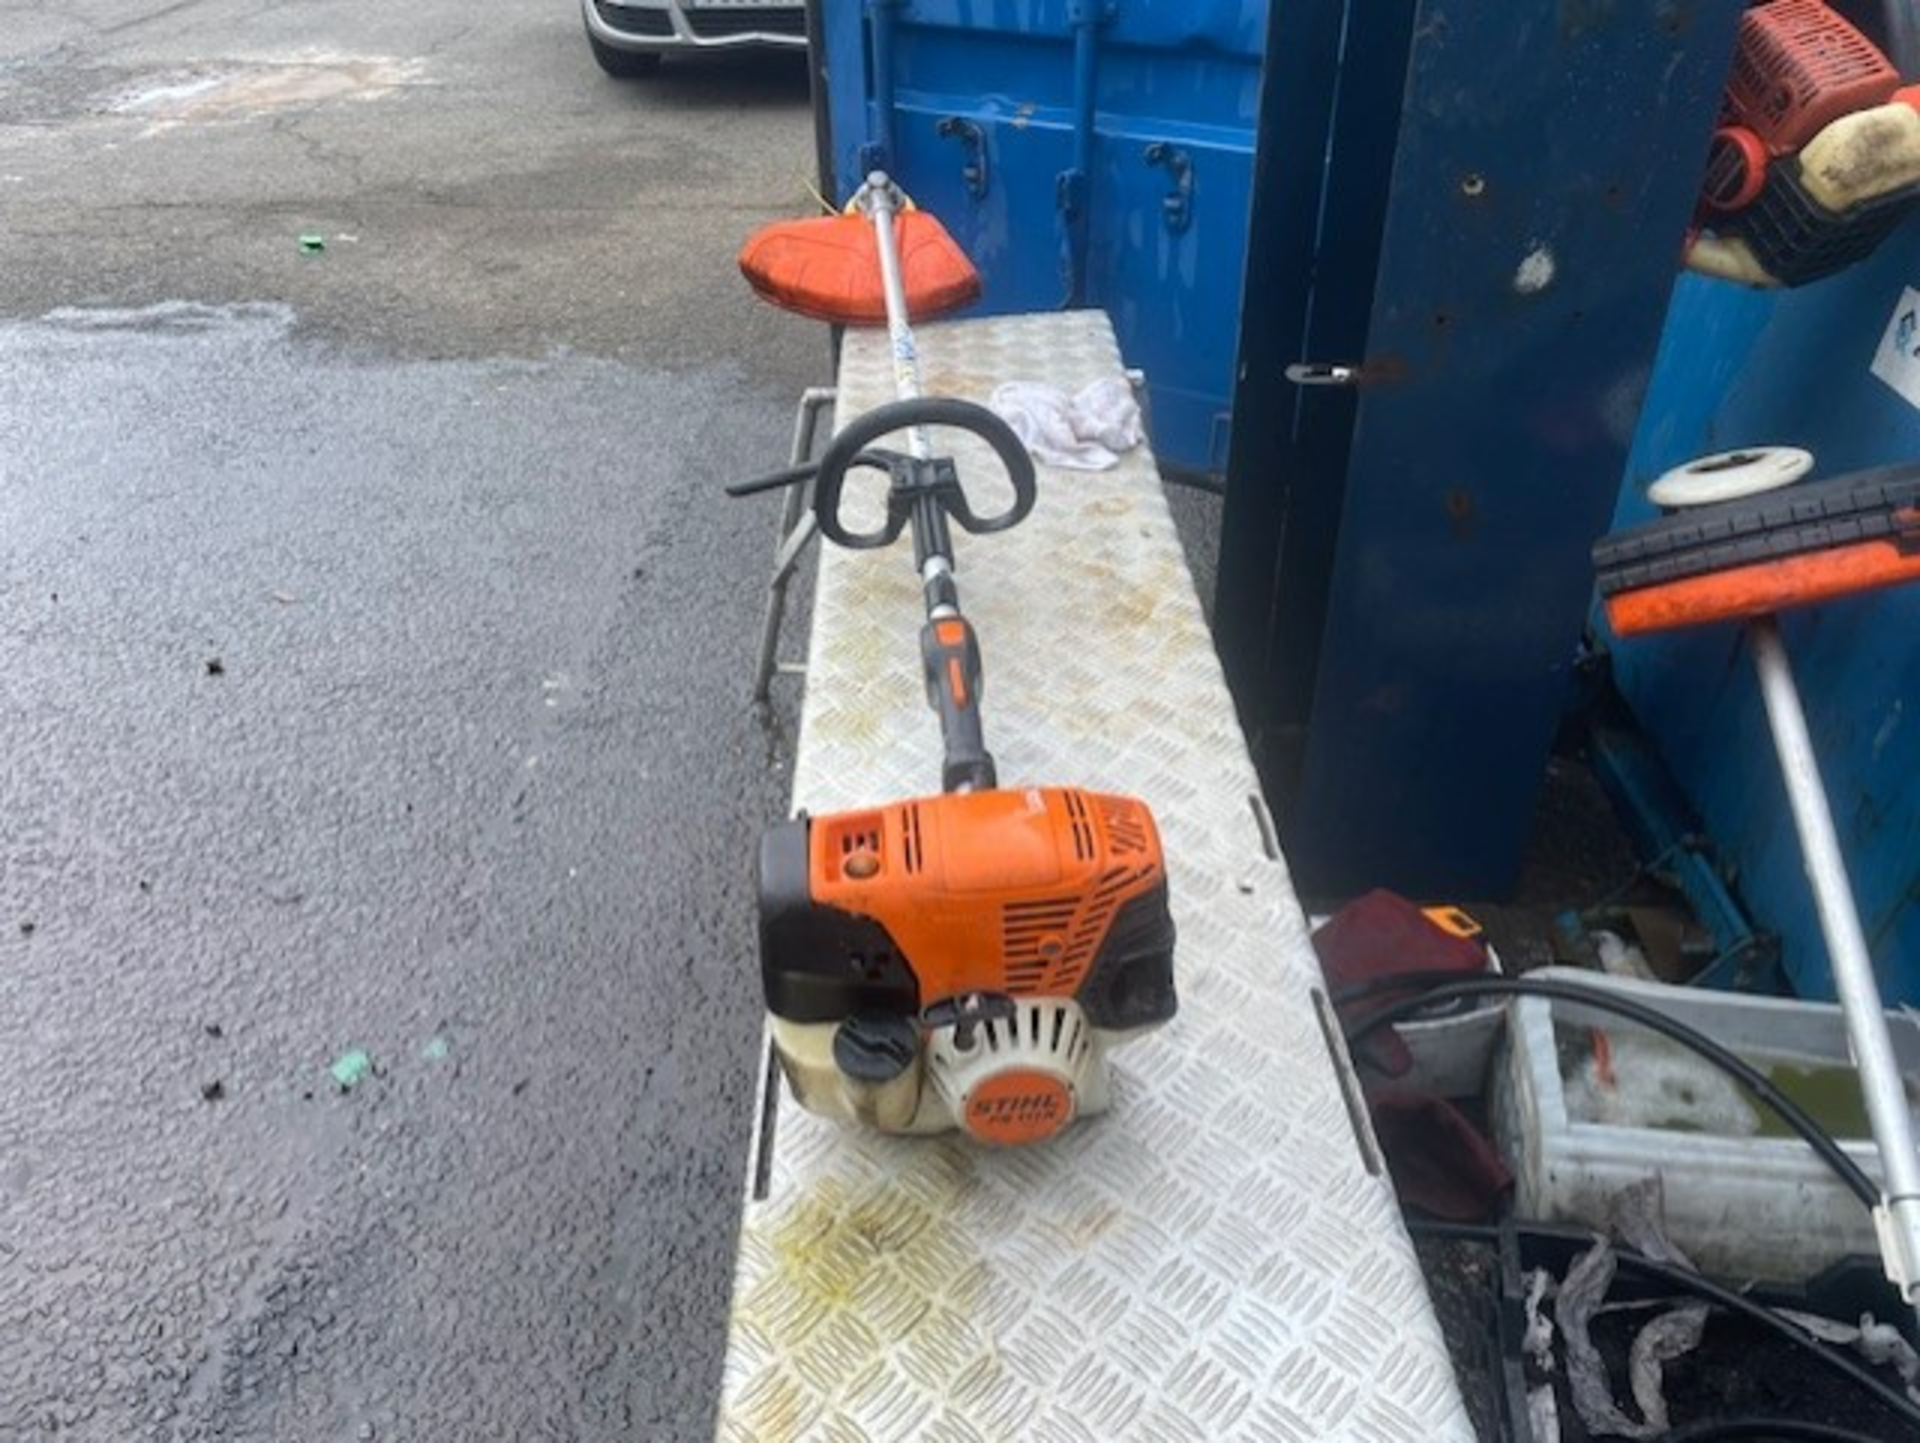 Stihl fs 111r strimmer good runner as per video sold with no warranty at all video says it all - Bild 4 aus 4